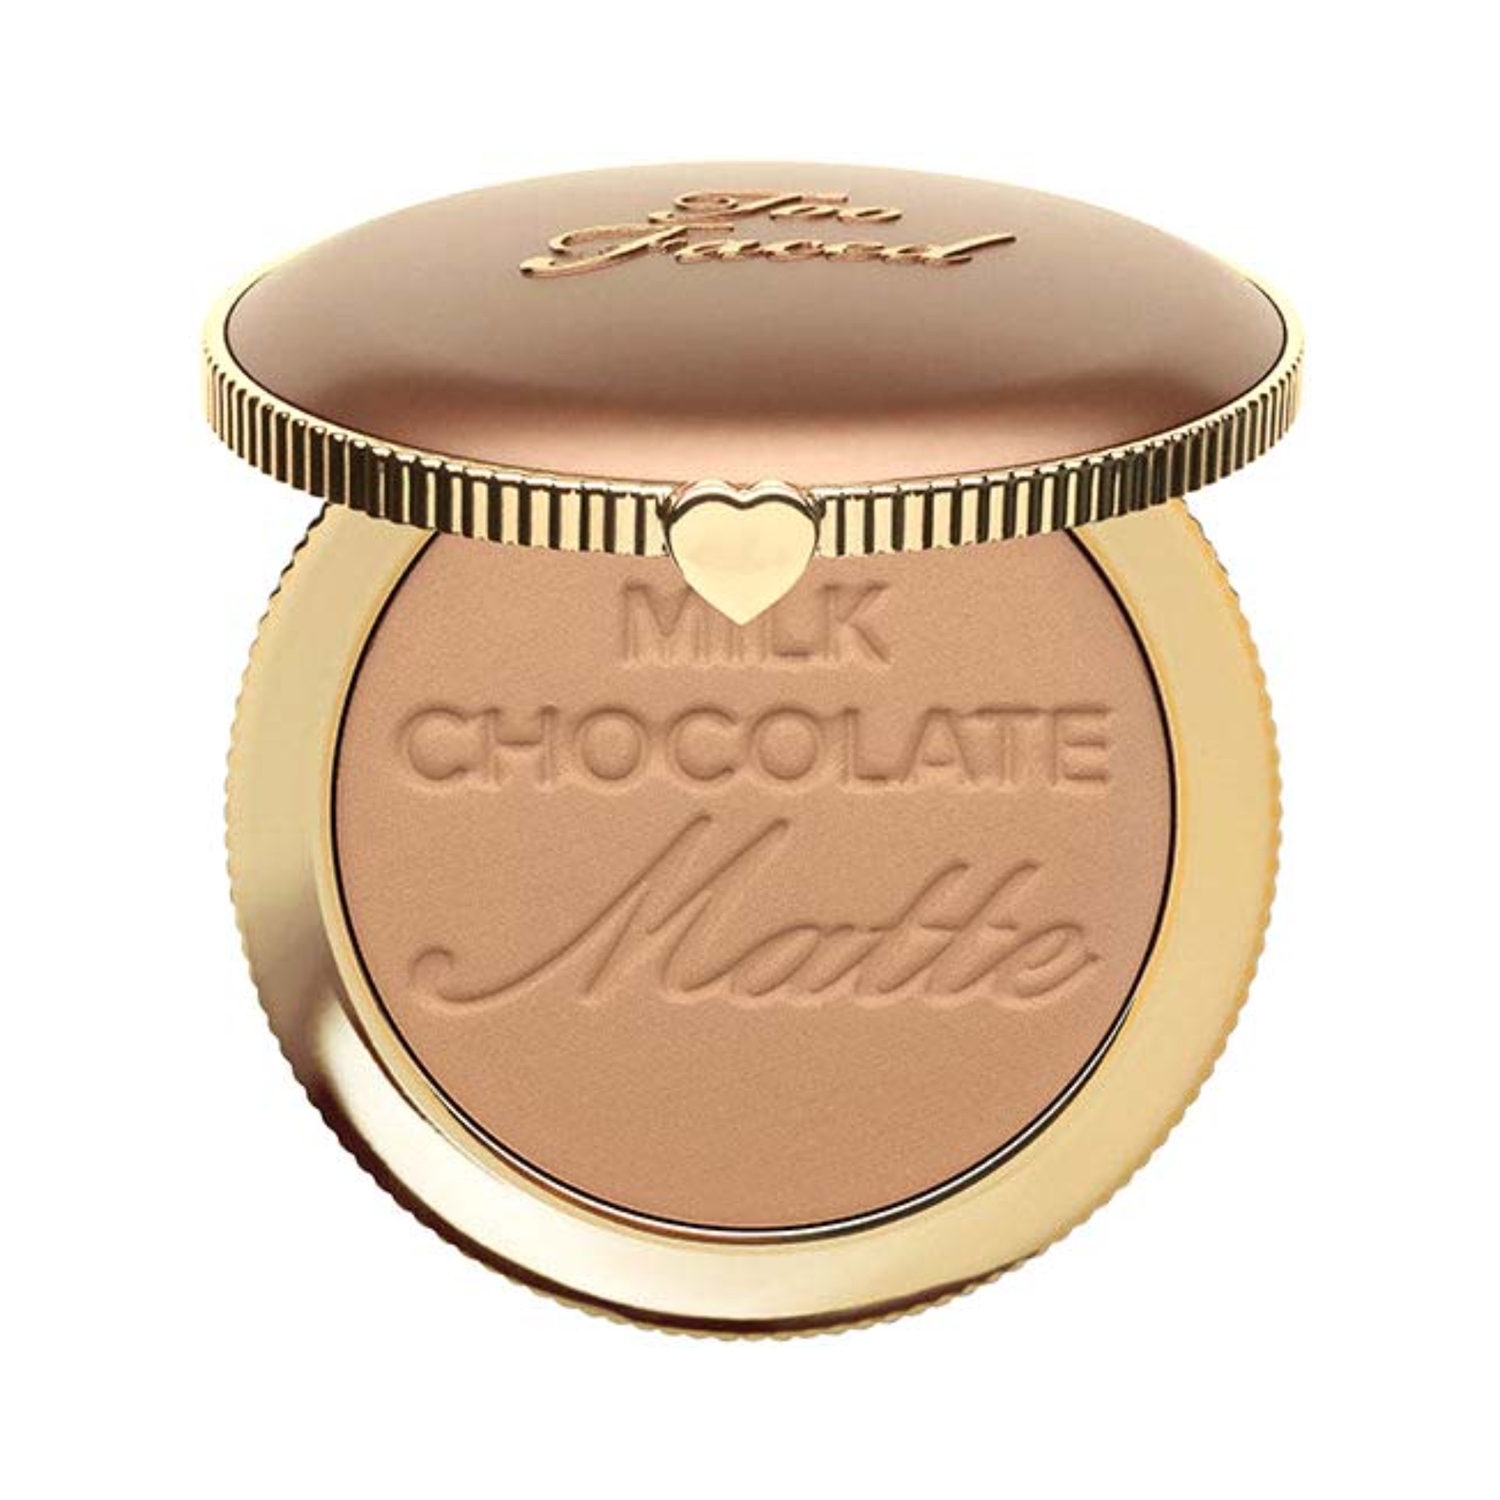 Too Faced | Too Faced Travel Size Chocolate Soleil Bronzer - Brown (2.8g)